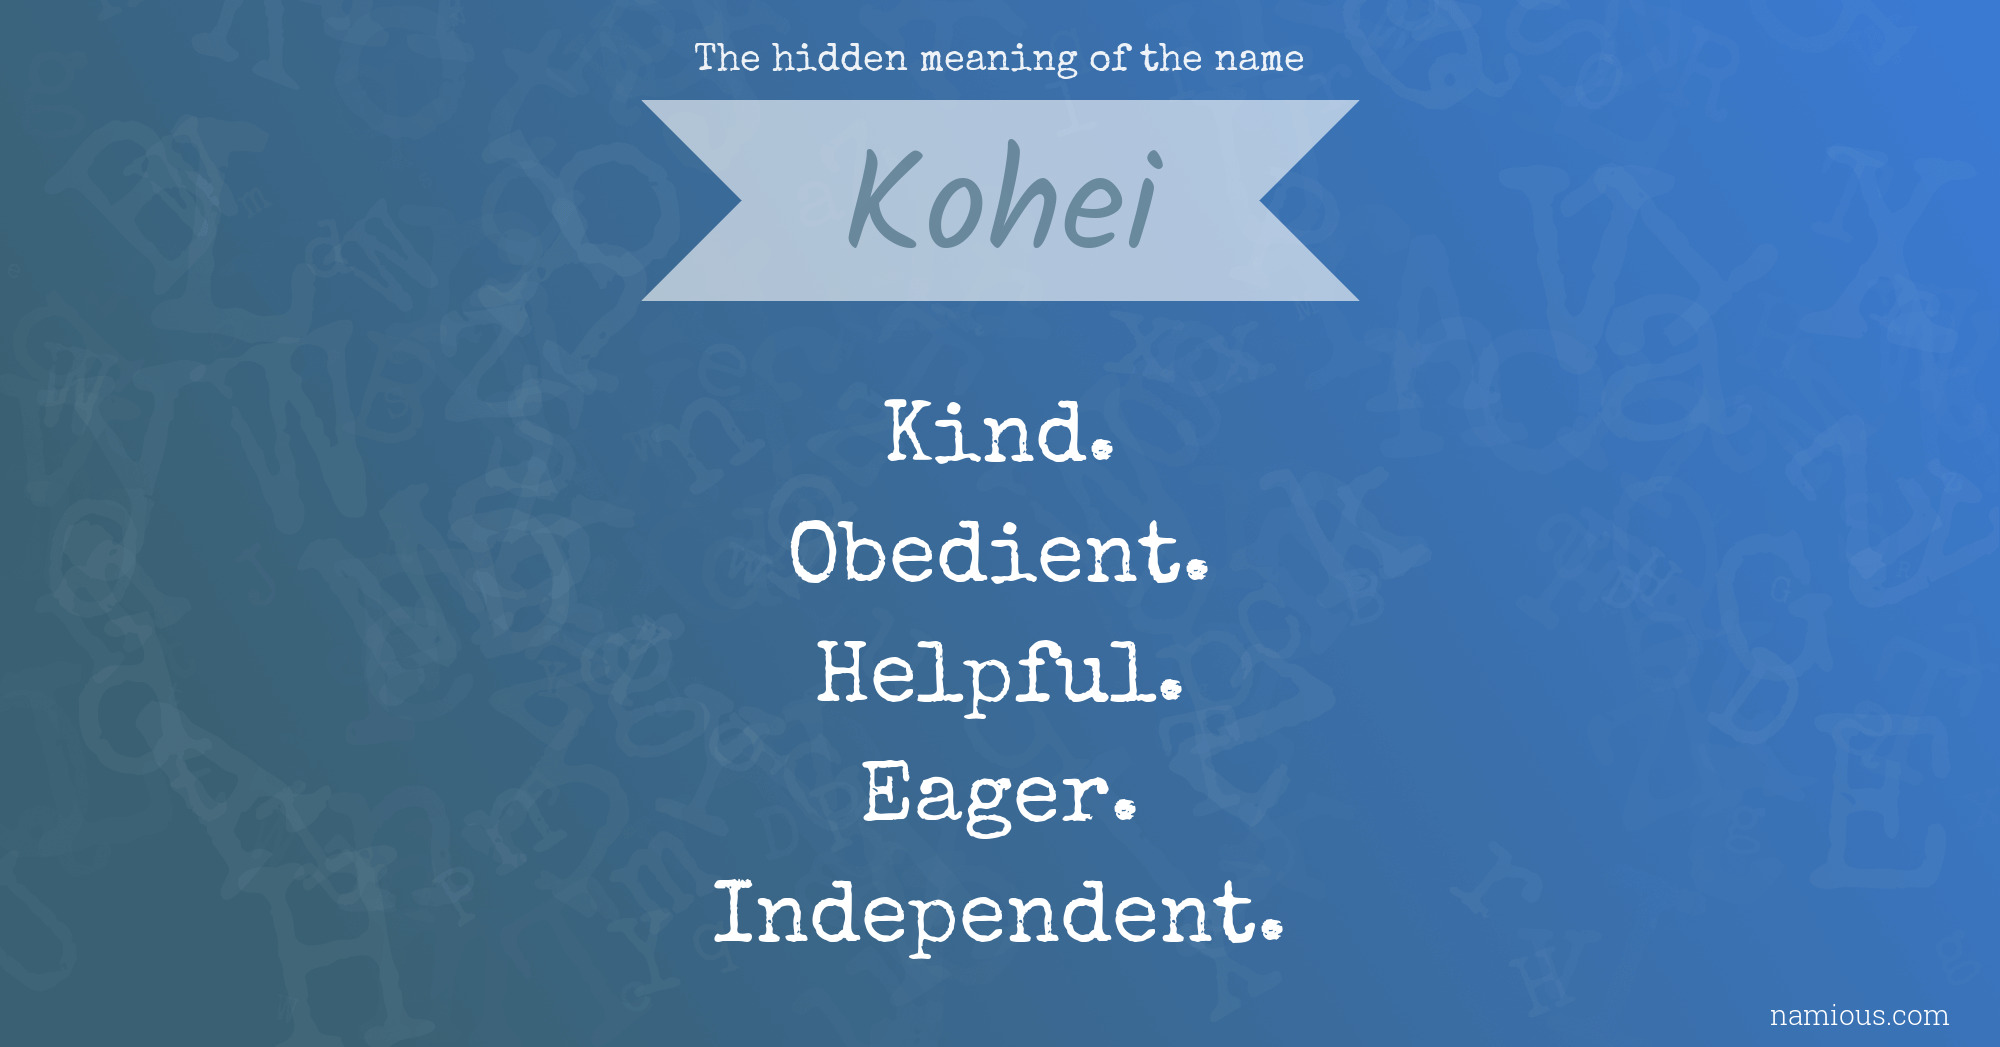 The hidden meaning of the name Kohei